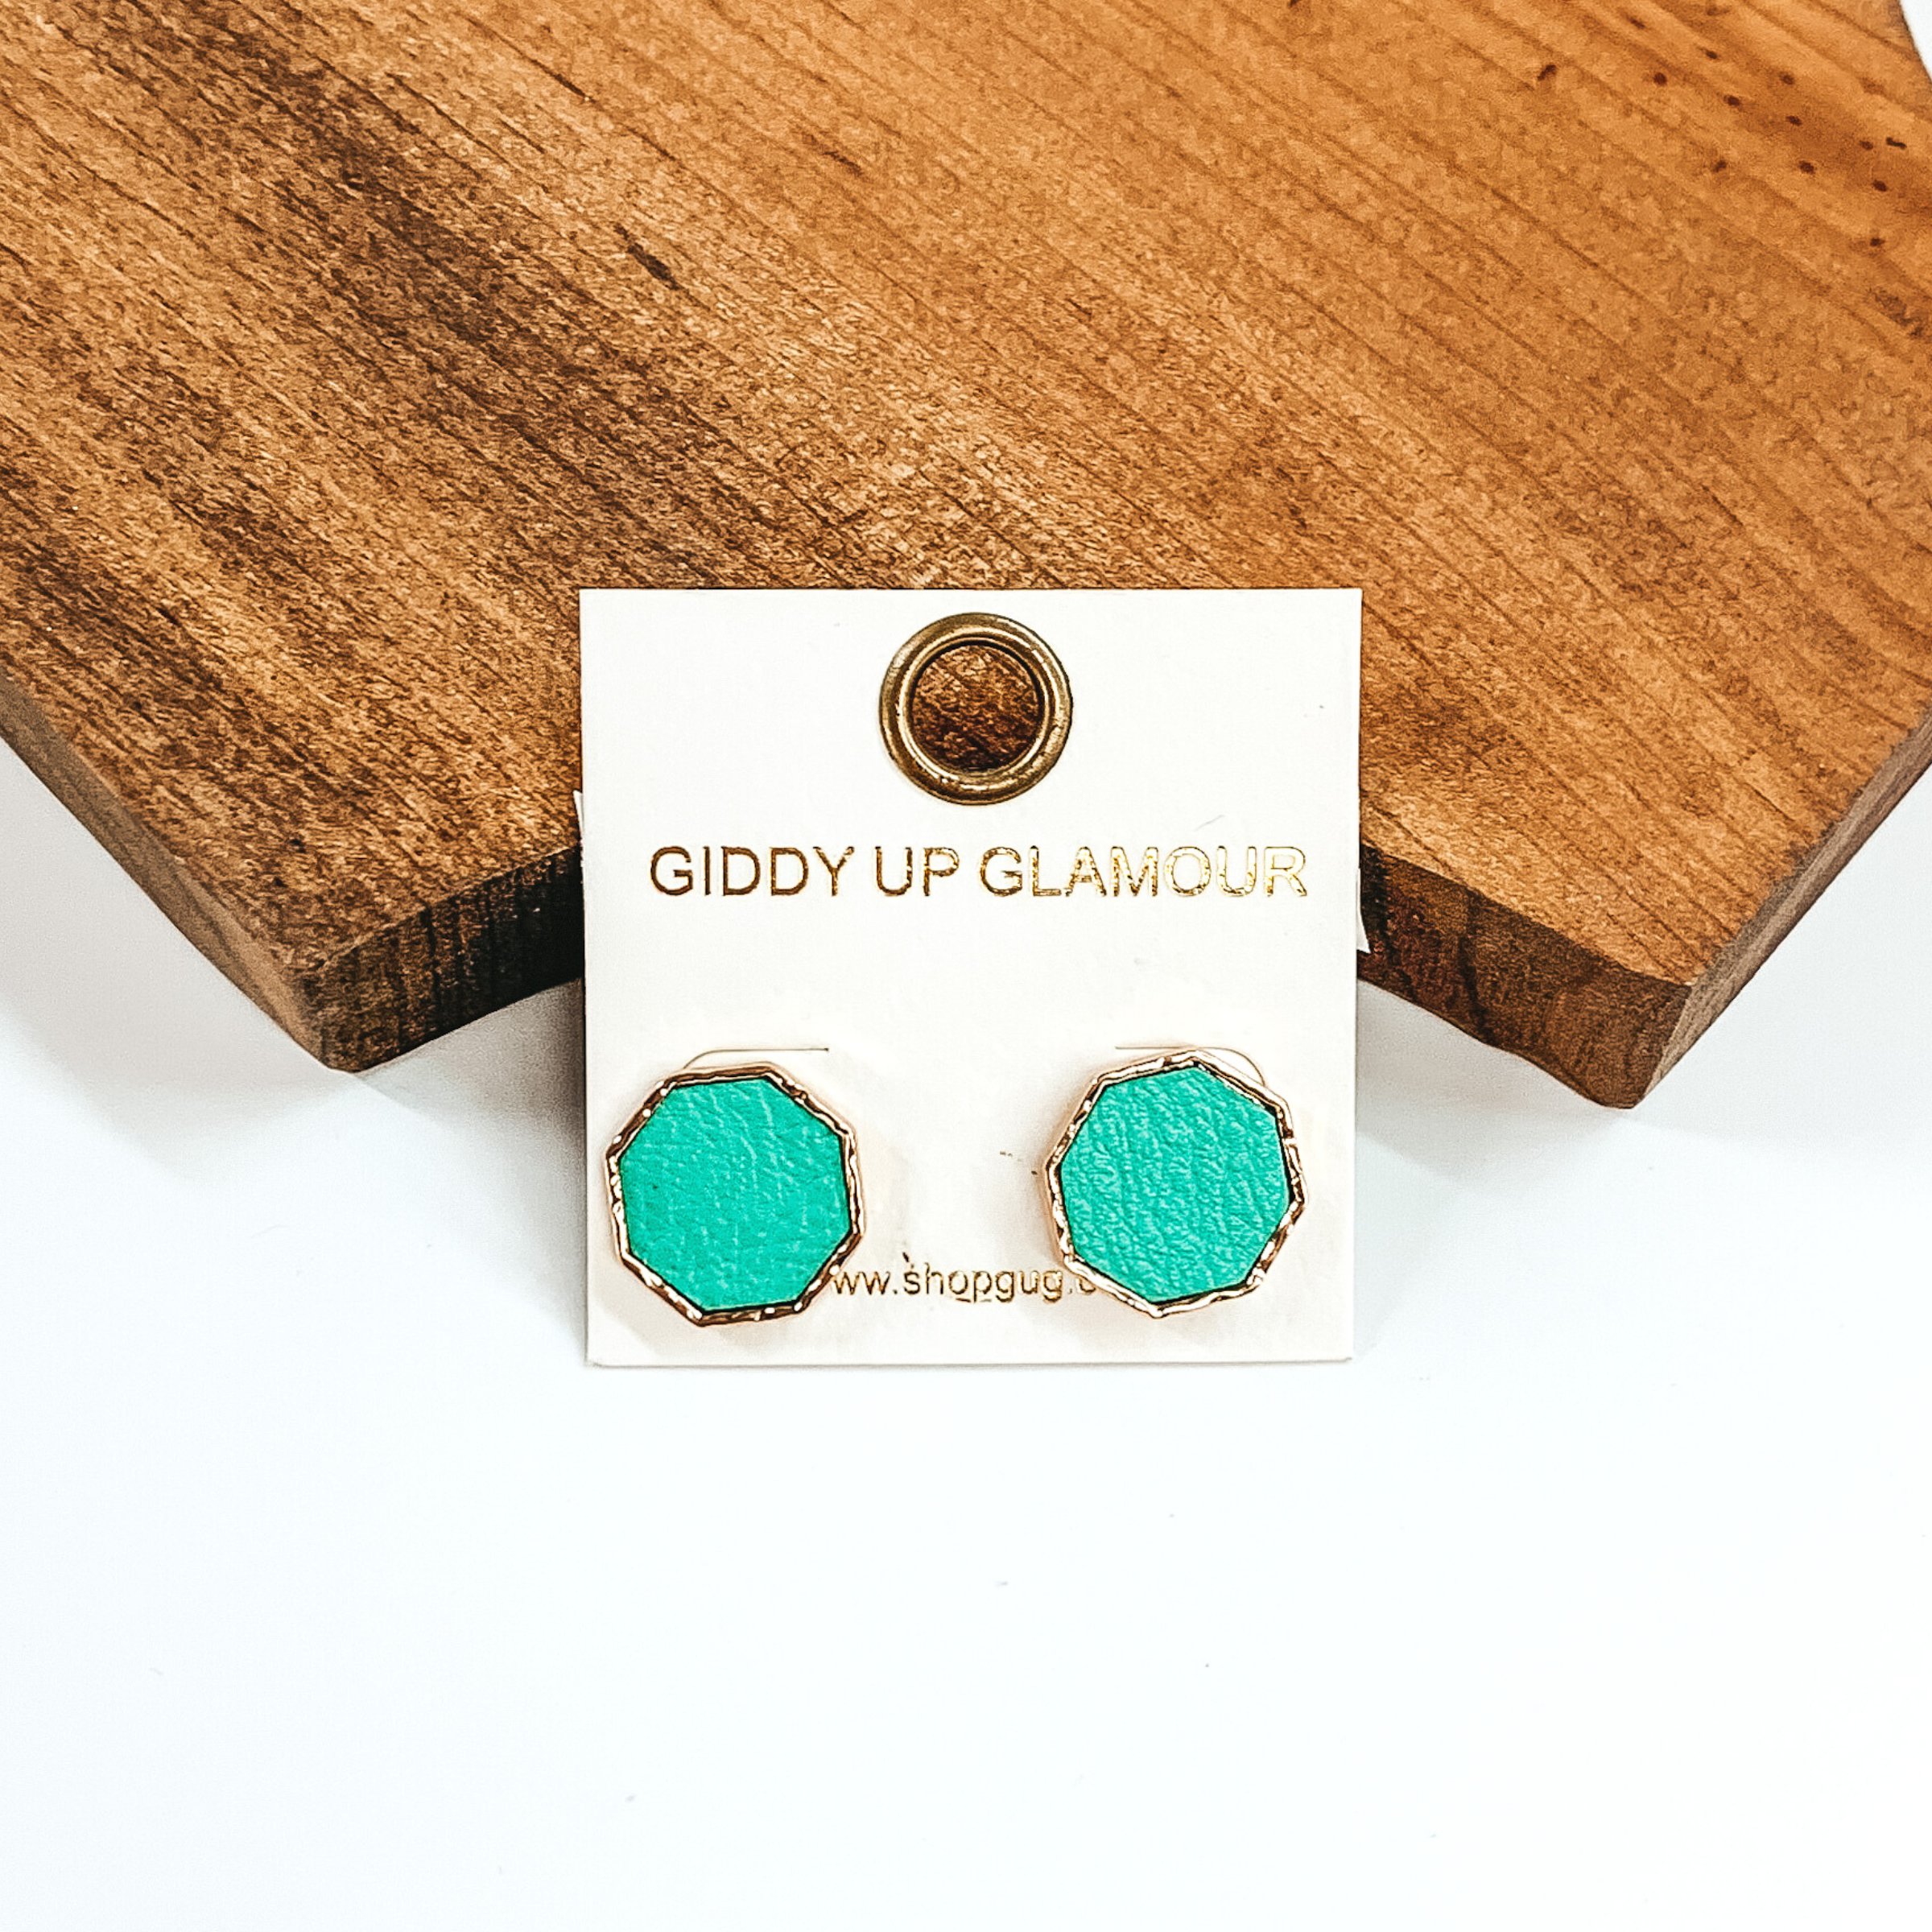 Gold, hexagon stud earrings with a green leather like inlay. Pictured on a white background in front of a piece of wood. 